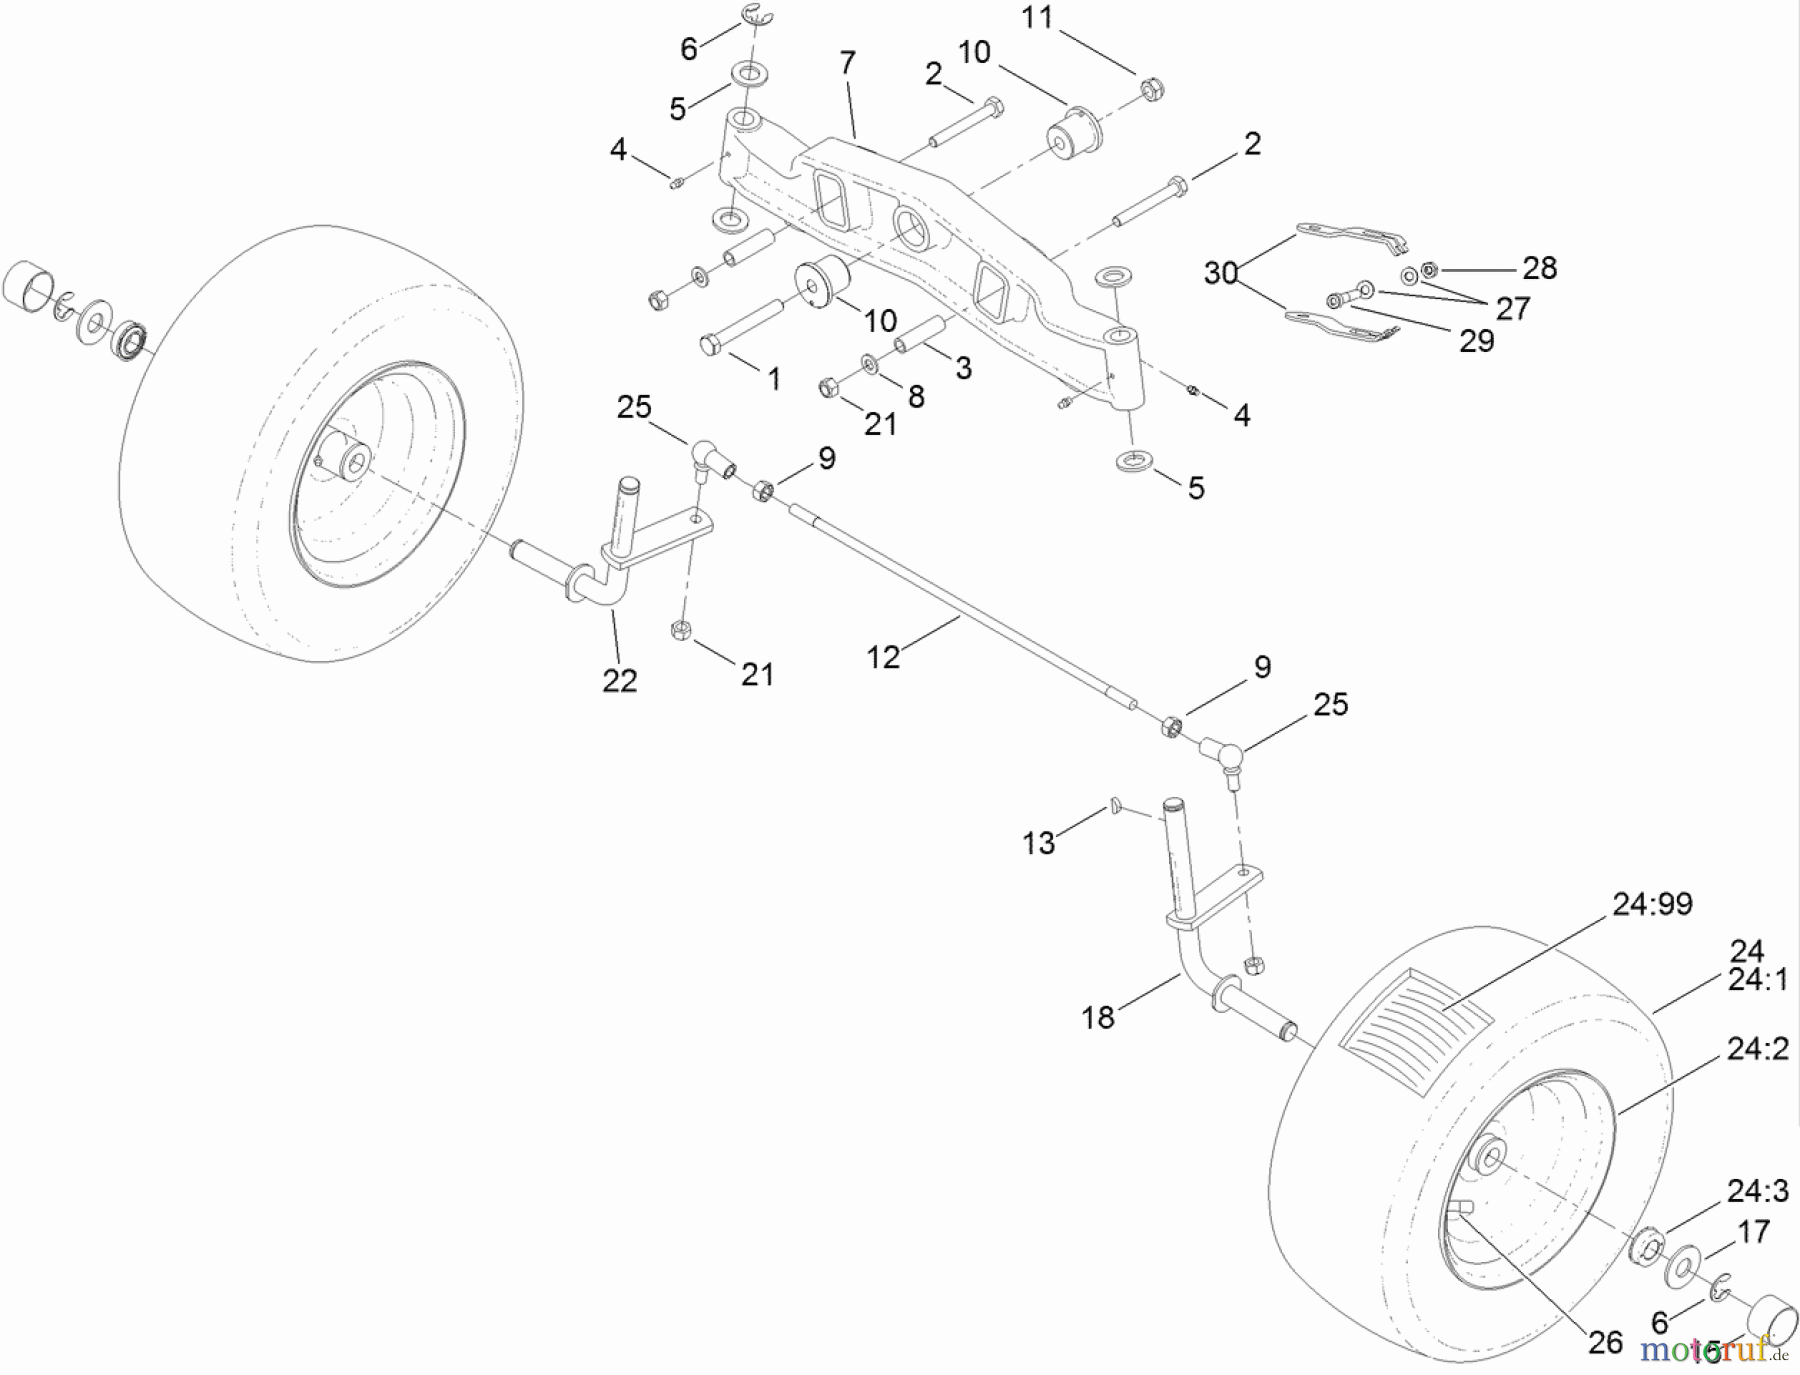  Toro Neu Mowers, Lawn & Garden Tractor Seite 1 74593 (DH 220) - Toro DH 220 Lawn Tractor, 2011 (311000401-311999999) FRONT AXLE ASSEMBLY